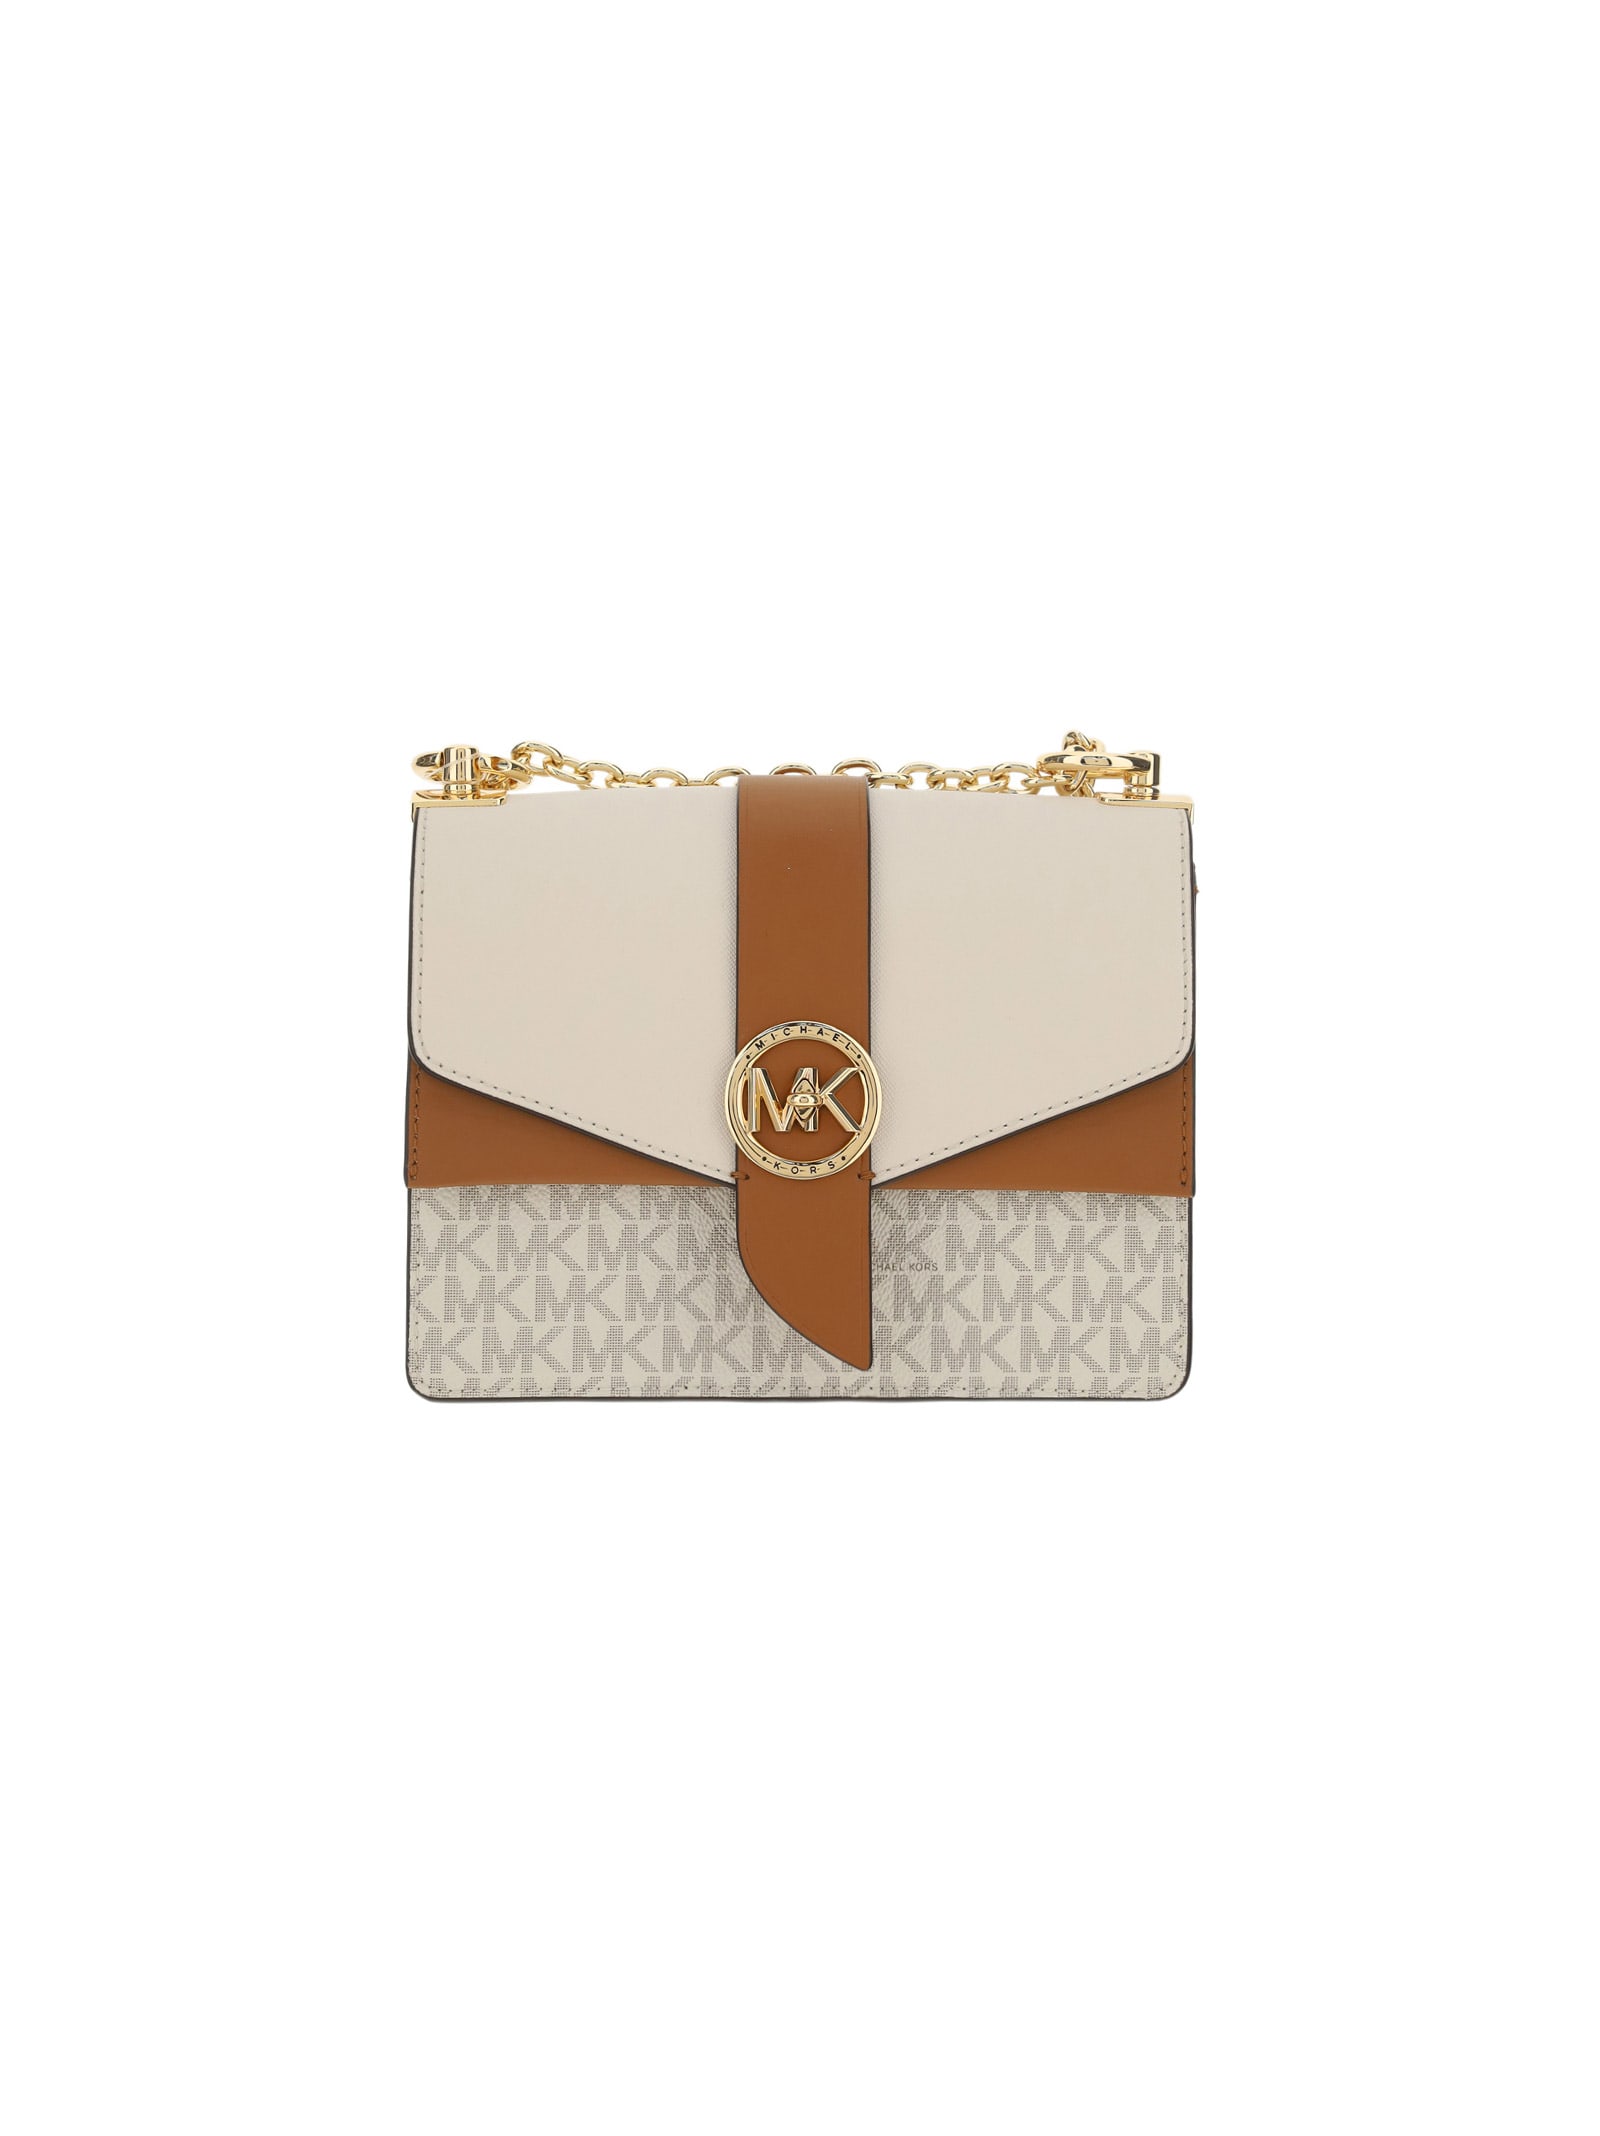 Michael Kors Greenwich Small Color-Block Logo and Saffiano Leather  Crossbody Bag